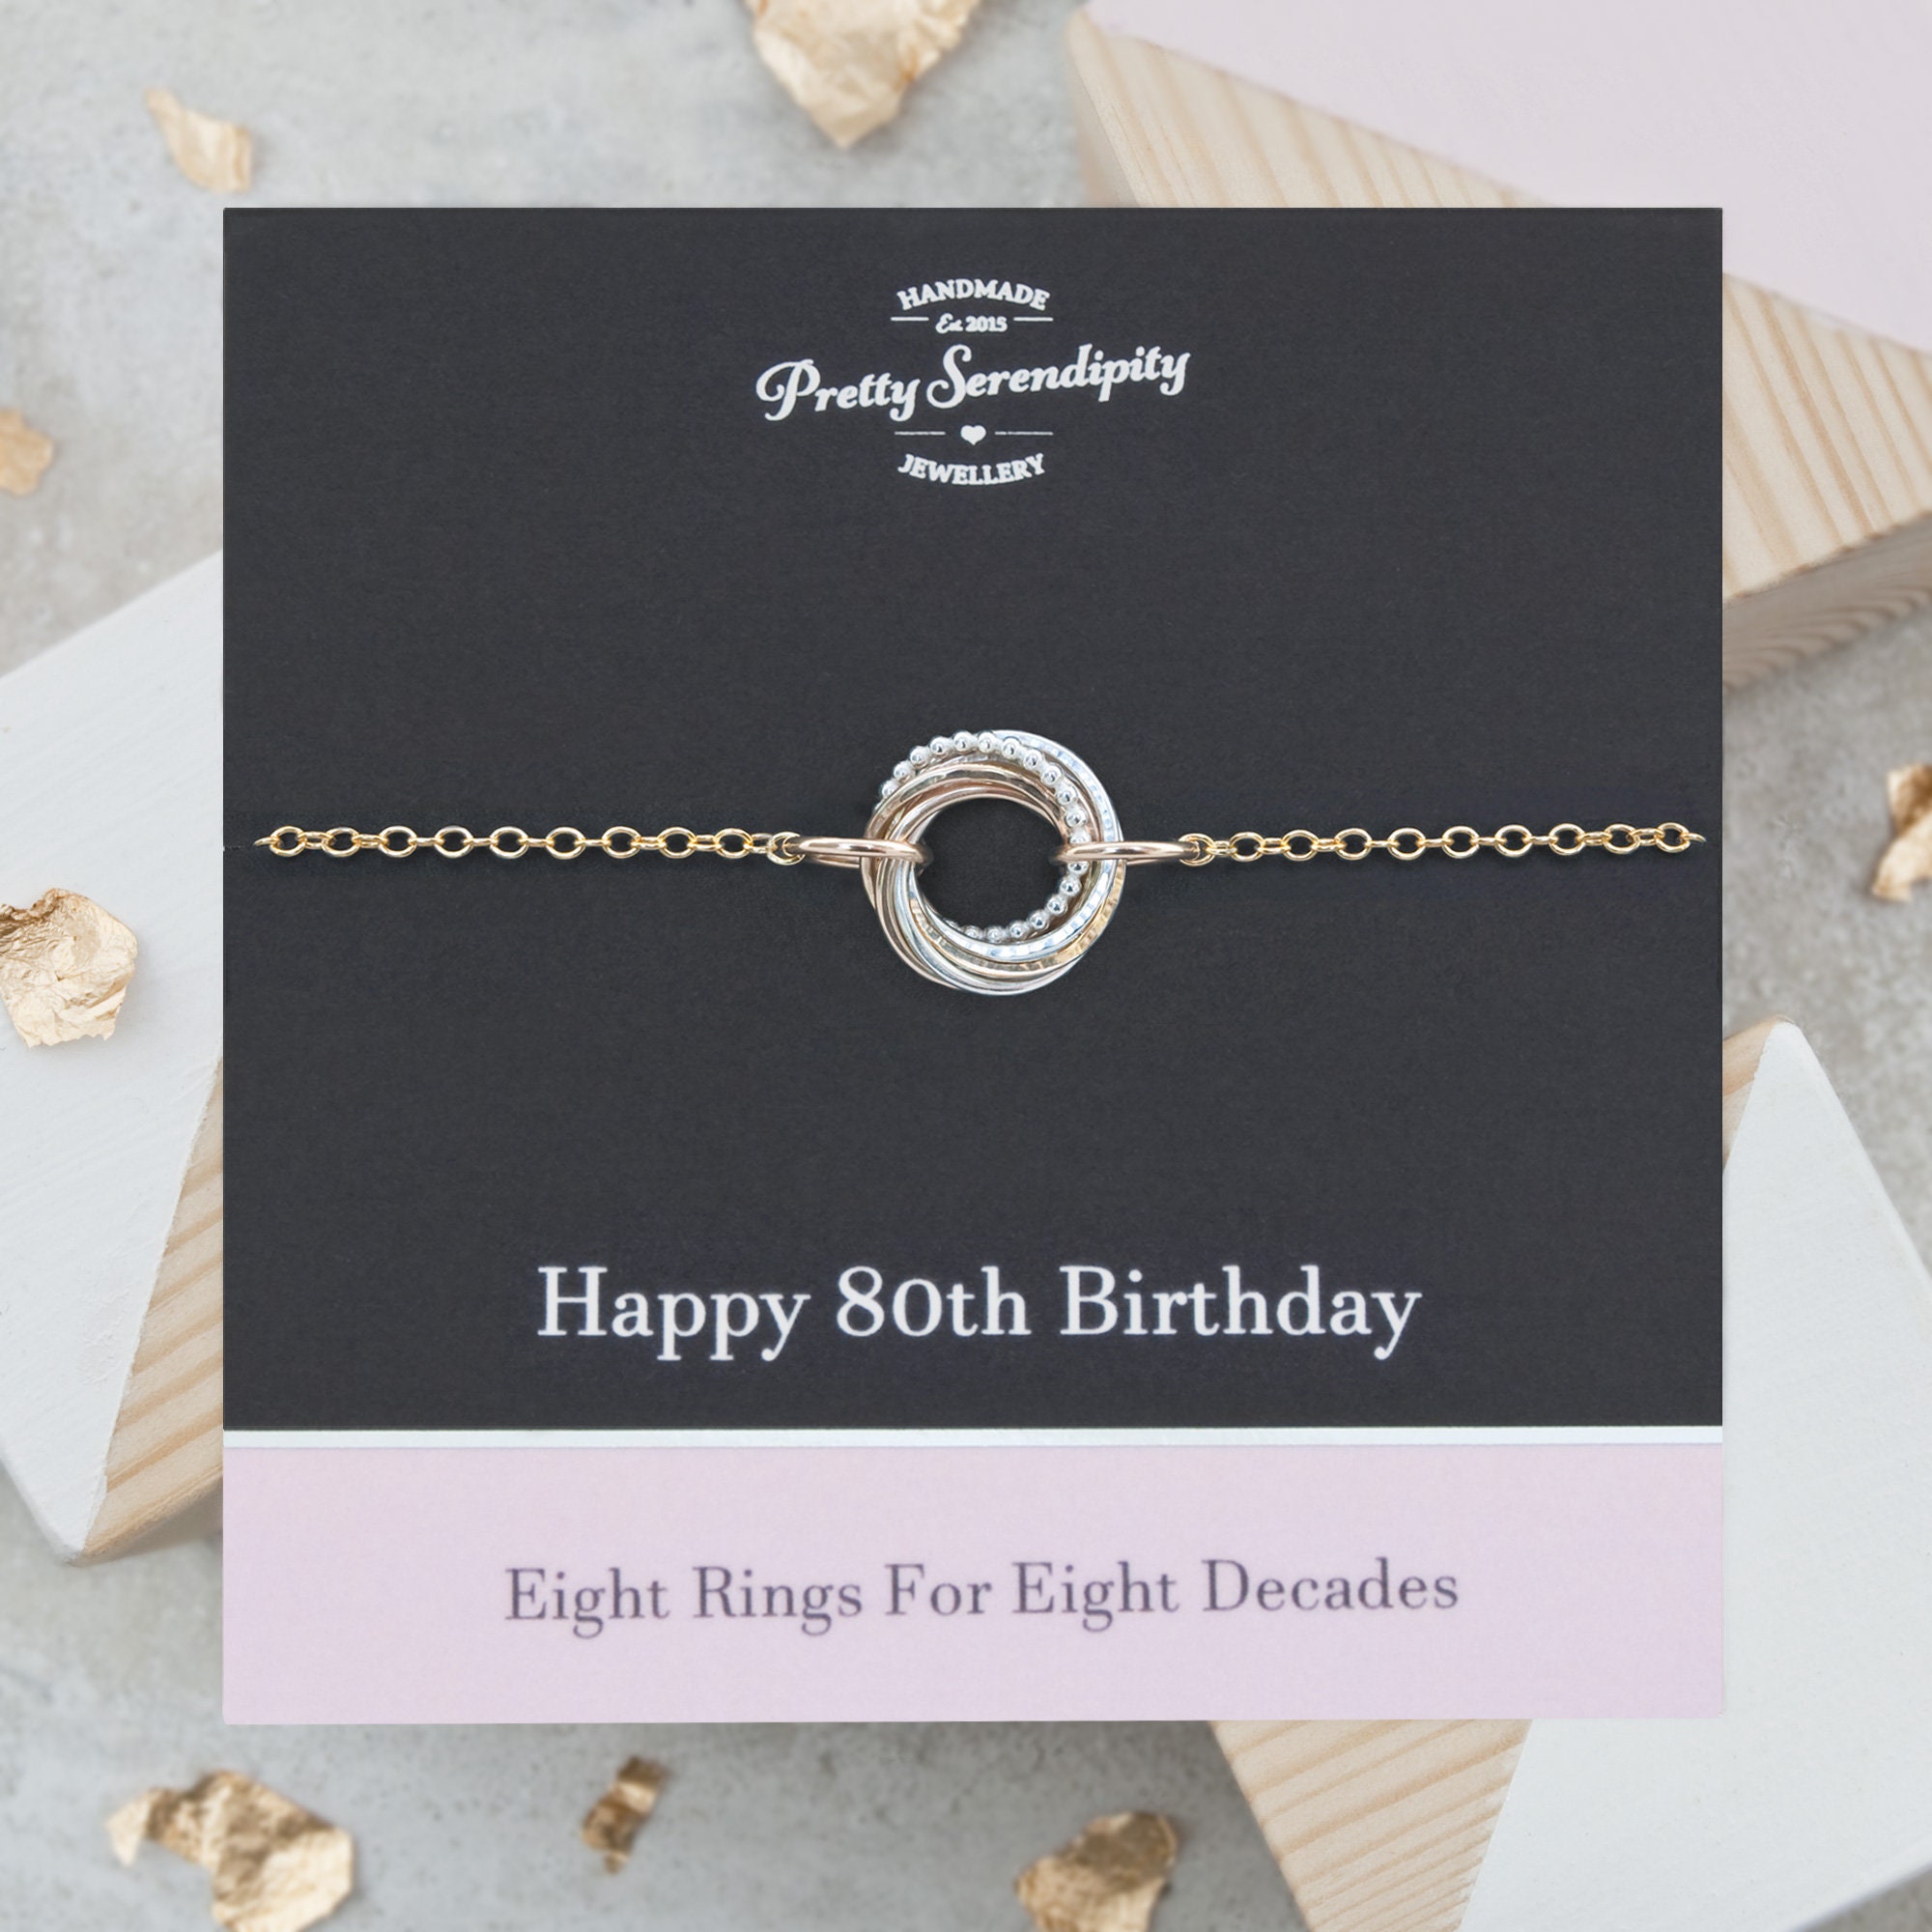 80Th Birthday Mixed Metal Bracelet - 8 Rings For Decades, Gifts Her, Silver & 14Ct Gold Fill